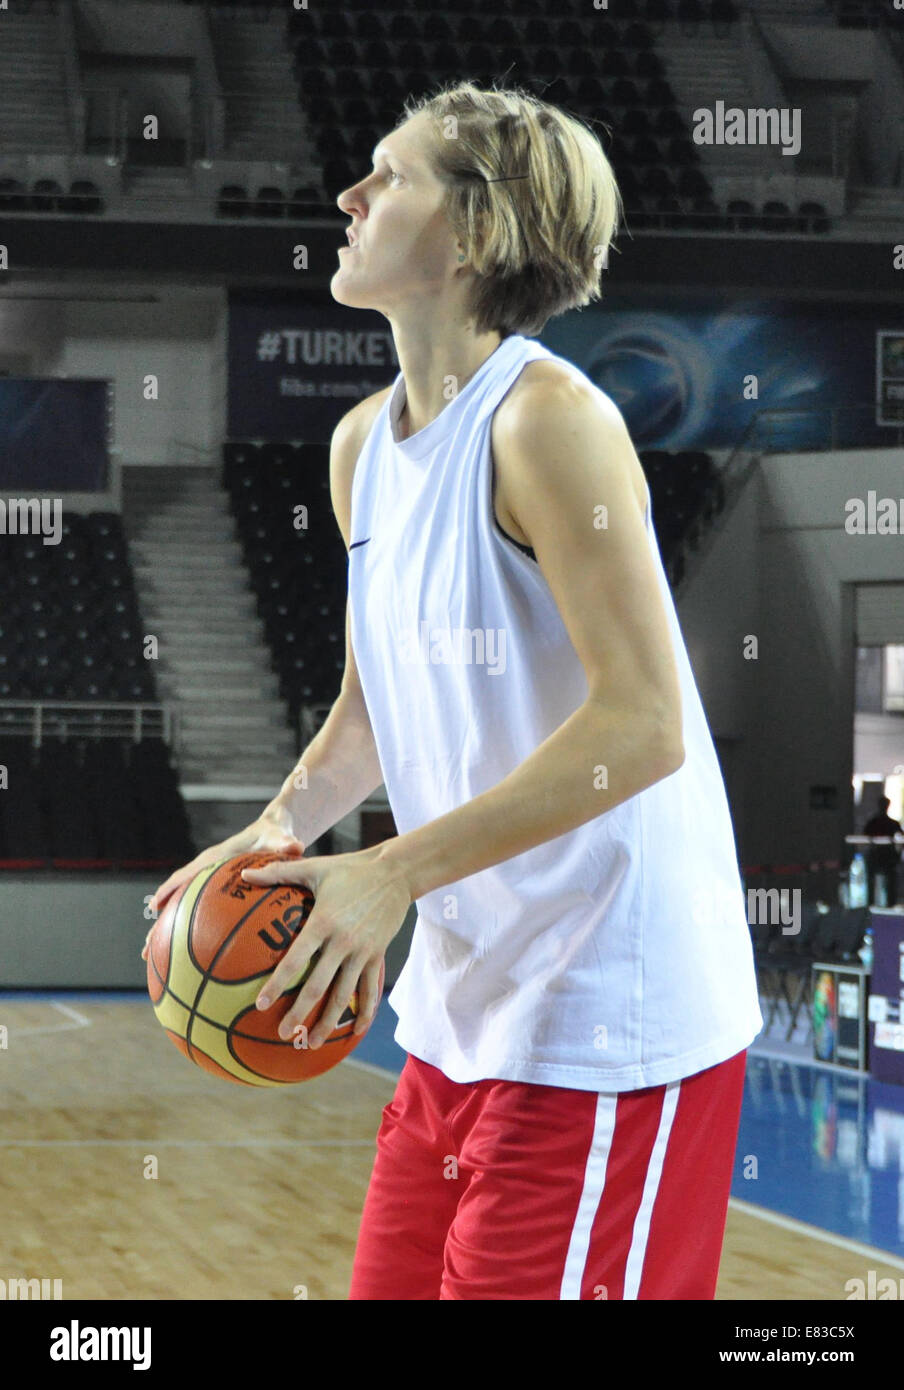 Czech player Jana Vesela trains prior to the match against Spain team in indoor sporting arena Ankara Arena, in which these days are played 2014 FIBA World Championship for Women matches, Ankara, Turkey, on Monday September 29, 2014. (CTK Photo/David Svab) Stock Photo